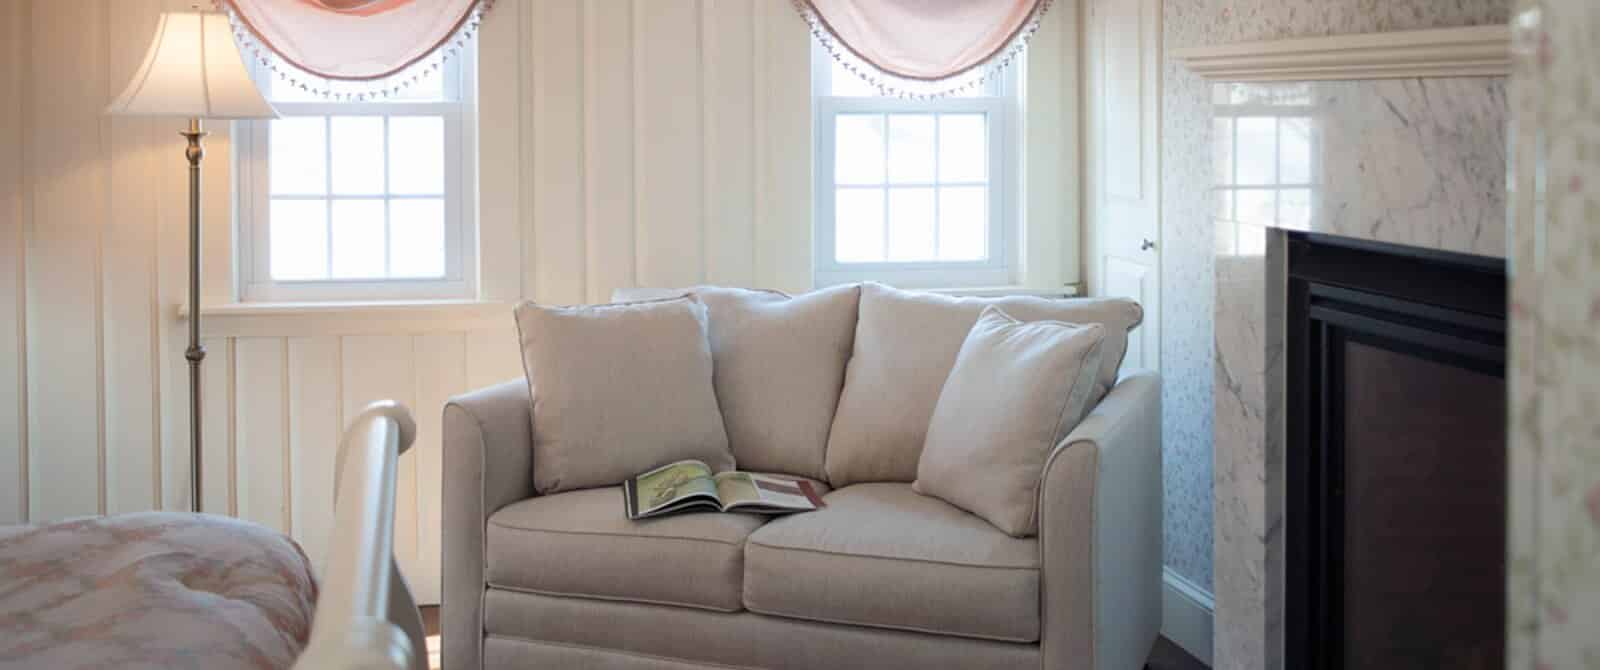 Beige loveseat in the corner of a bedroom by two windows and fireplace